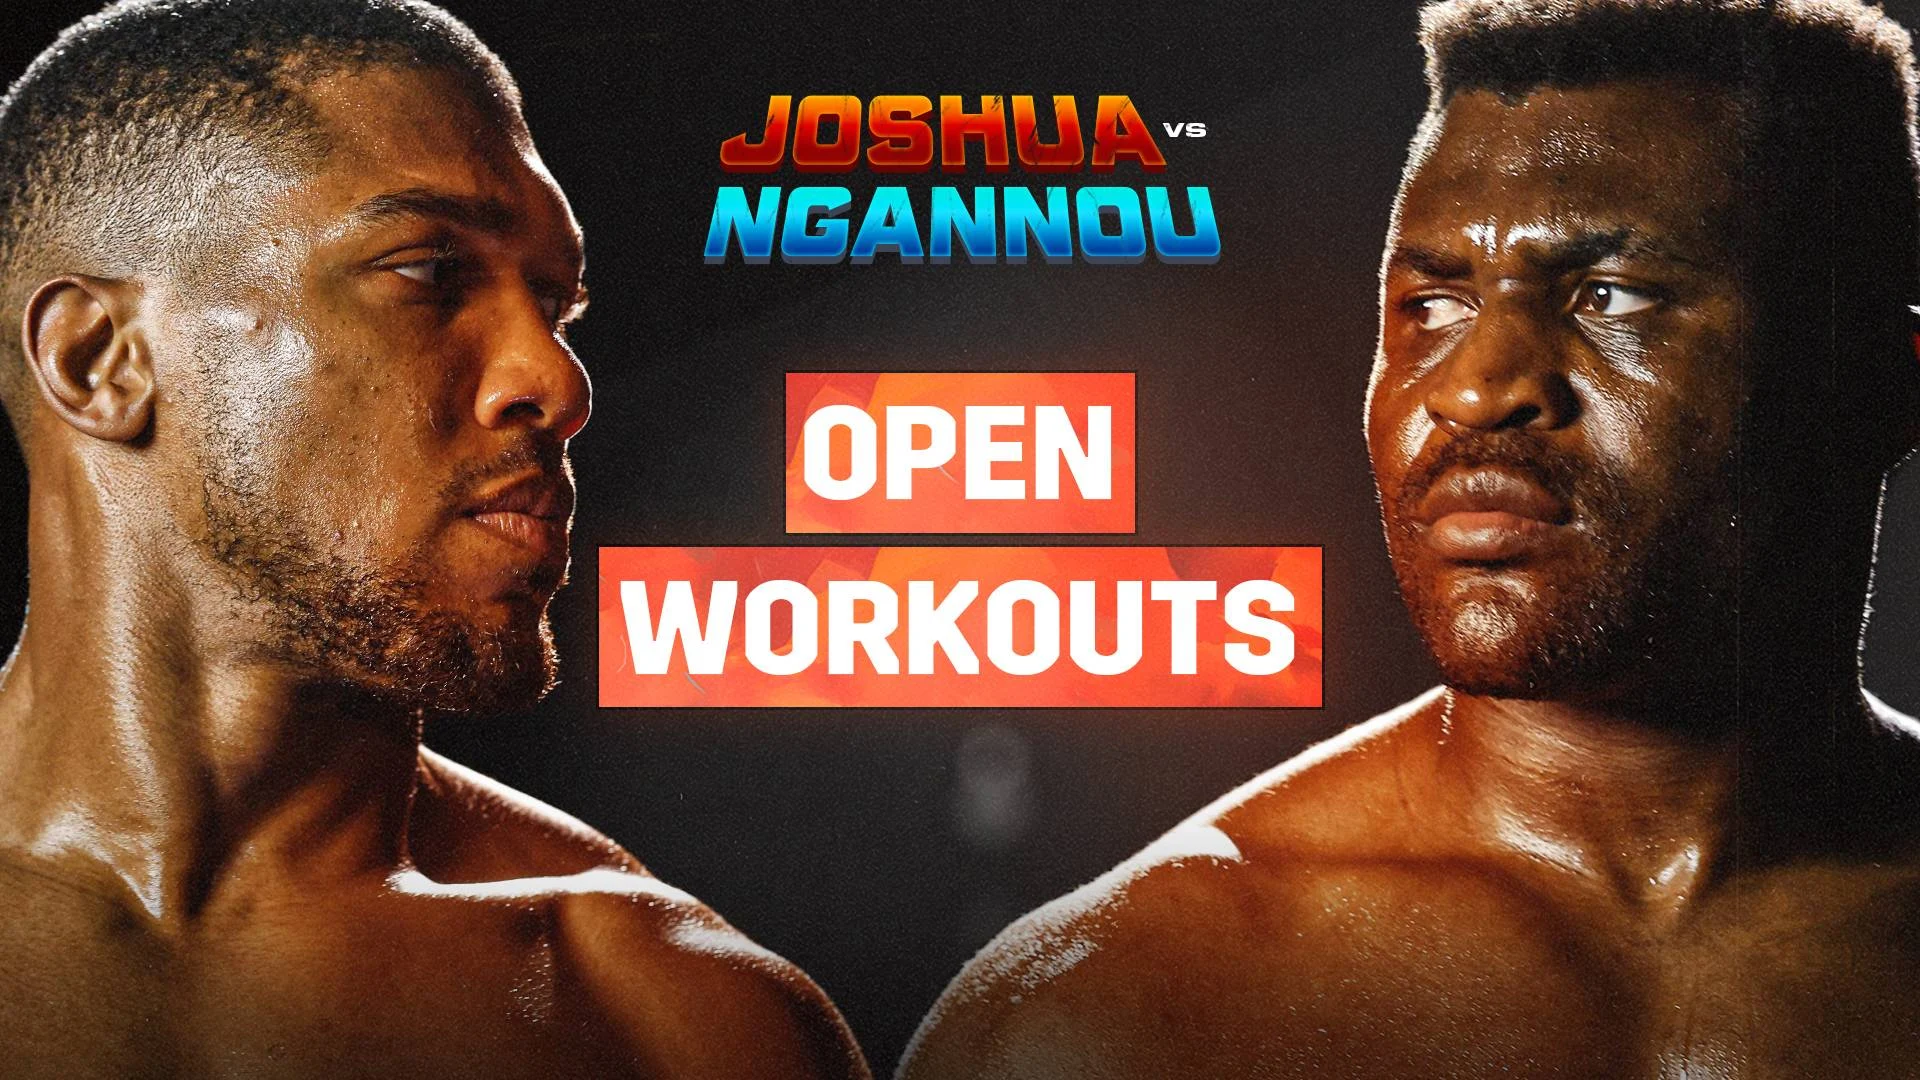 Joshua vs Ngannou, Who is the Favorite to Win the Match